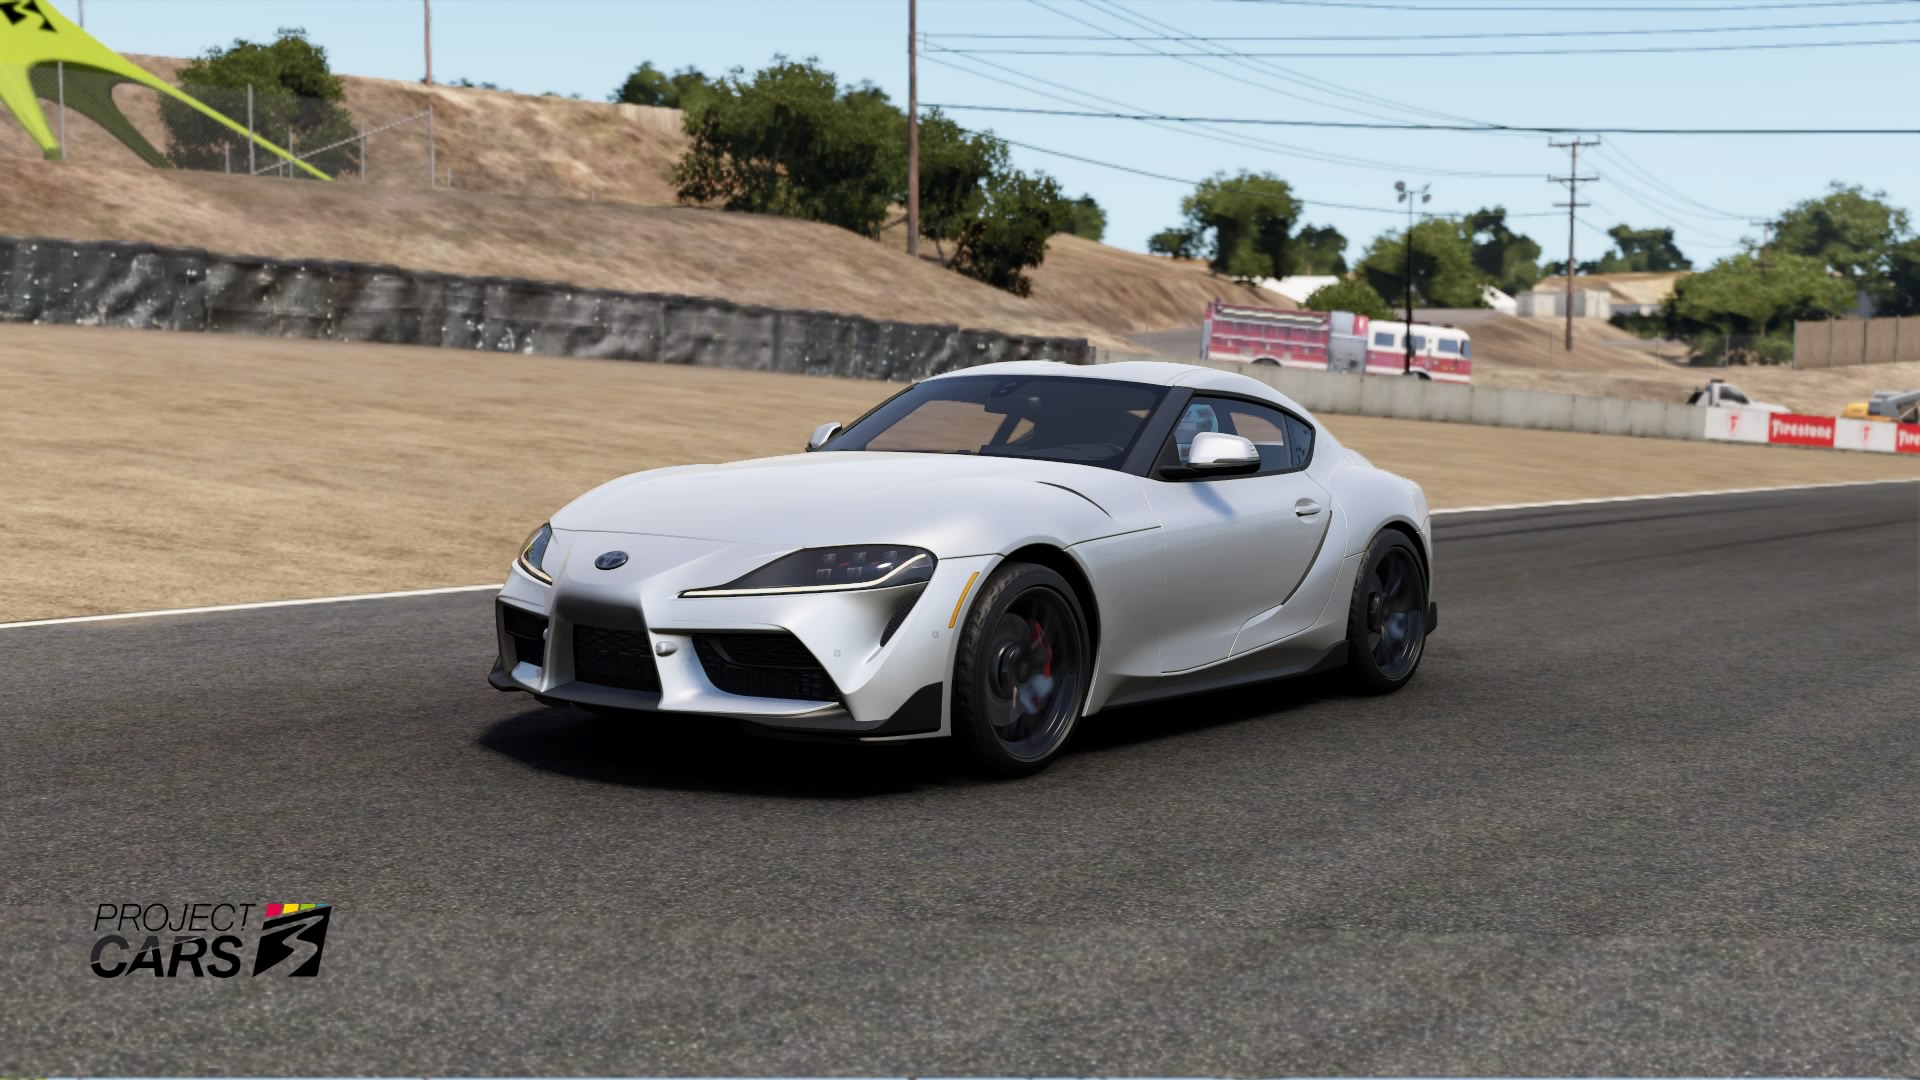 General 1920x1080 desert Toyota GR Supra Laguna Seca Project Cars 3 PlayStation 4 vehicle video game art screen shot video games watermarked power lines headlights frontal view trees sky car road